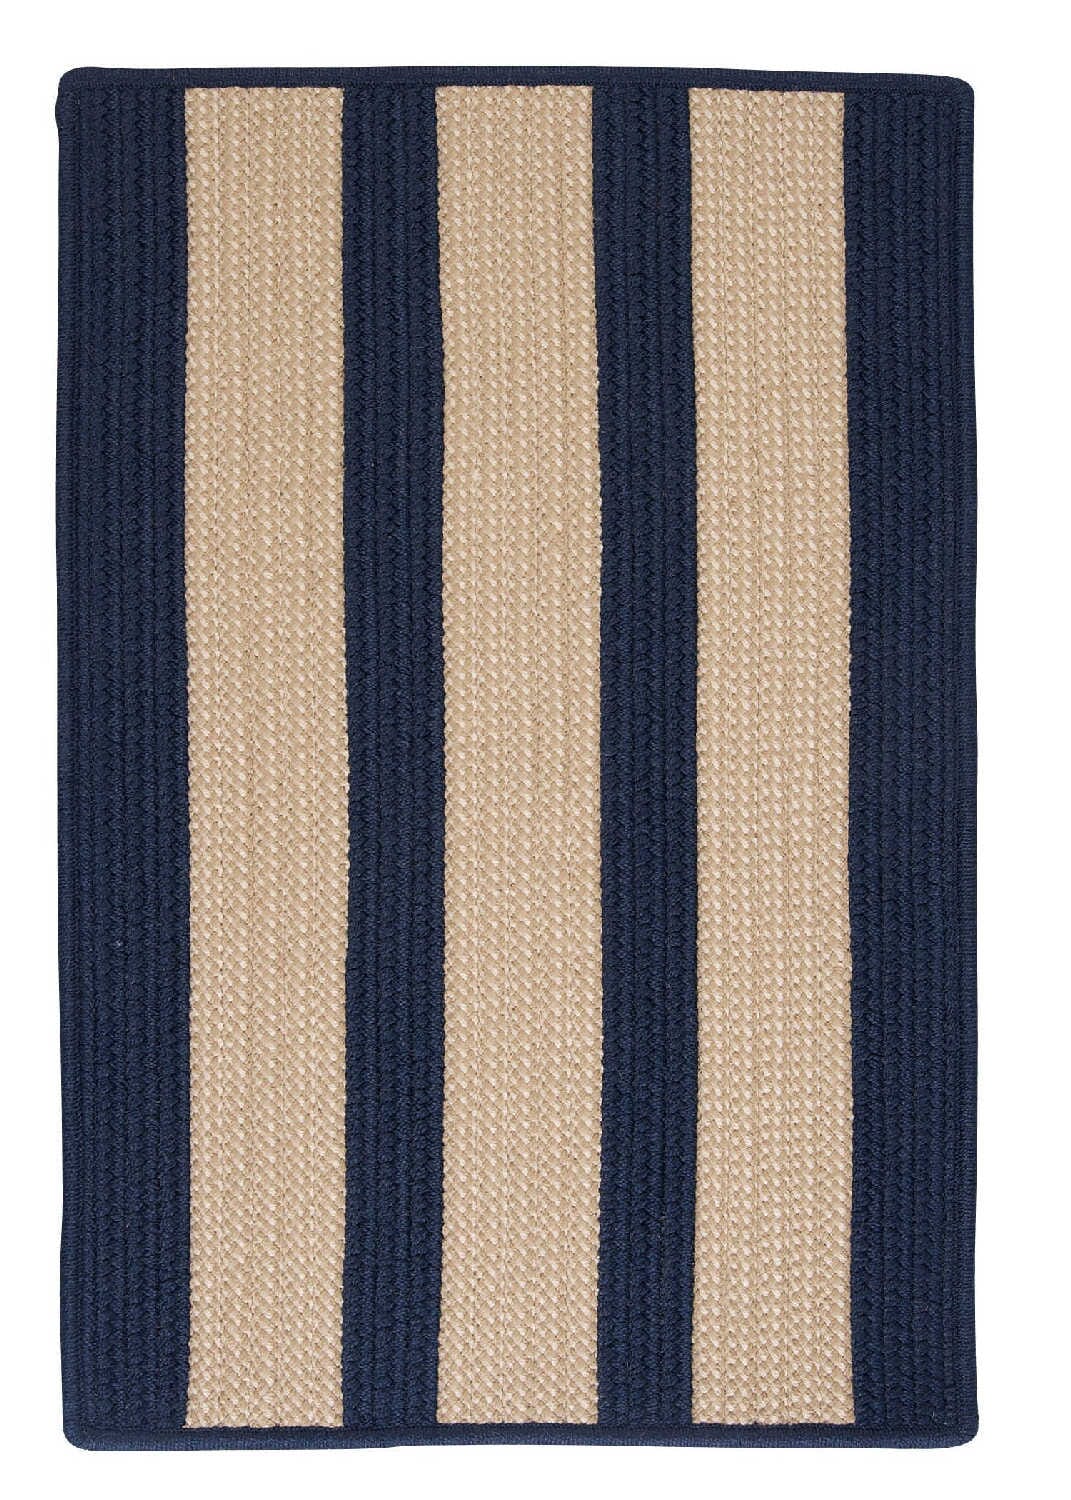 Colonial Mills Boat House Bt59 Navy / Blue / Neutral Striped Area Rug